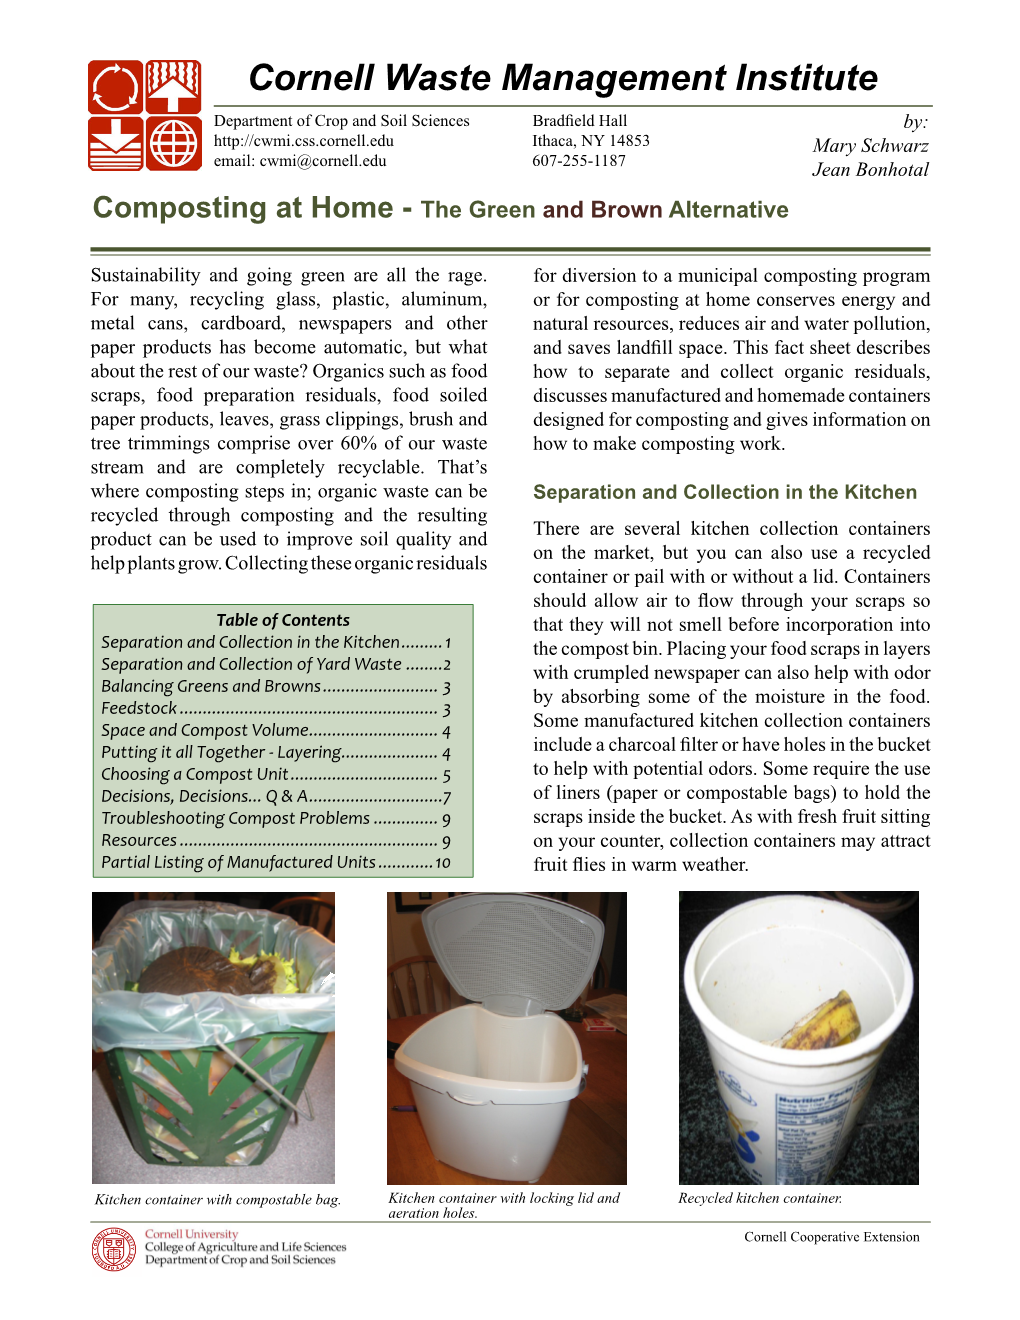 Composting at Home - the Green and Brown Alternative